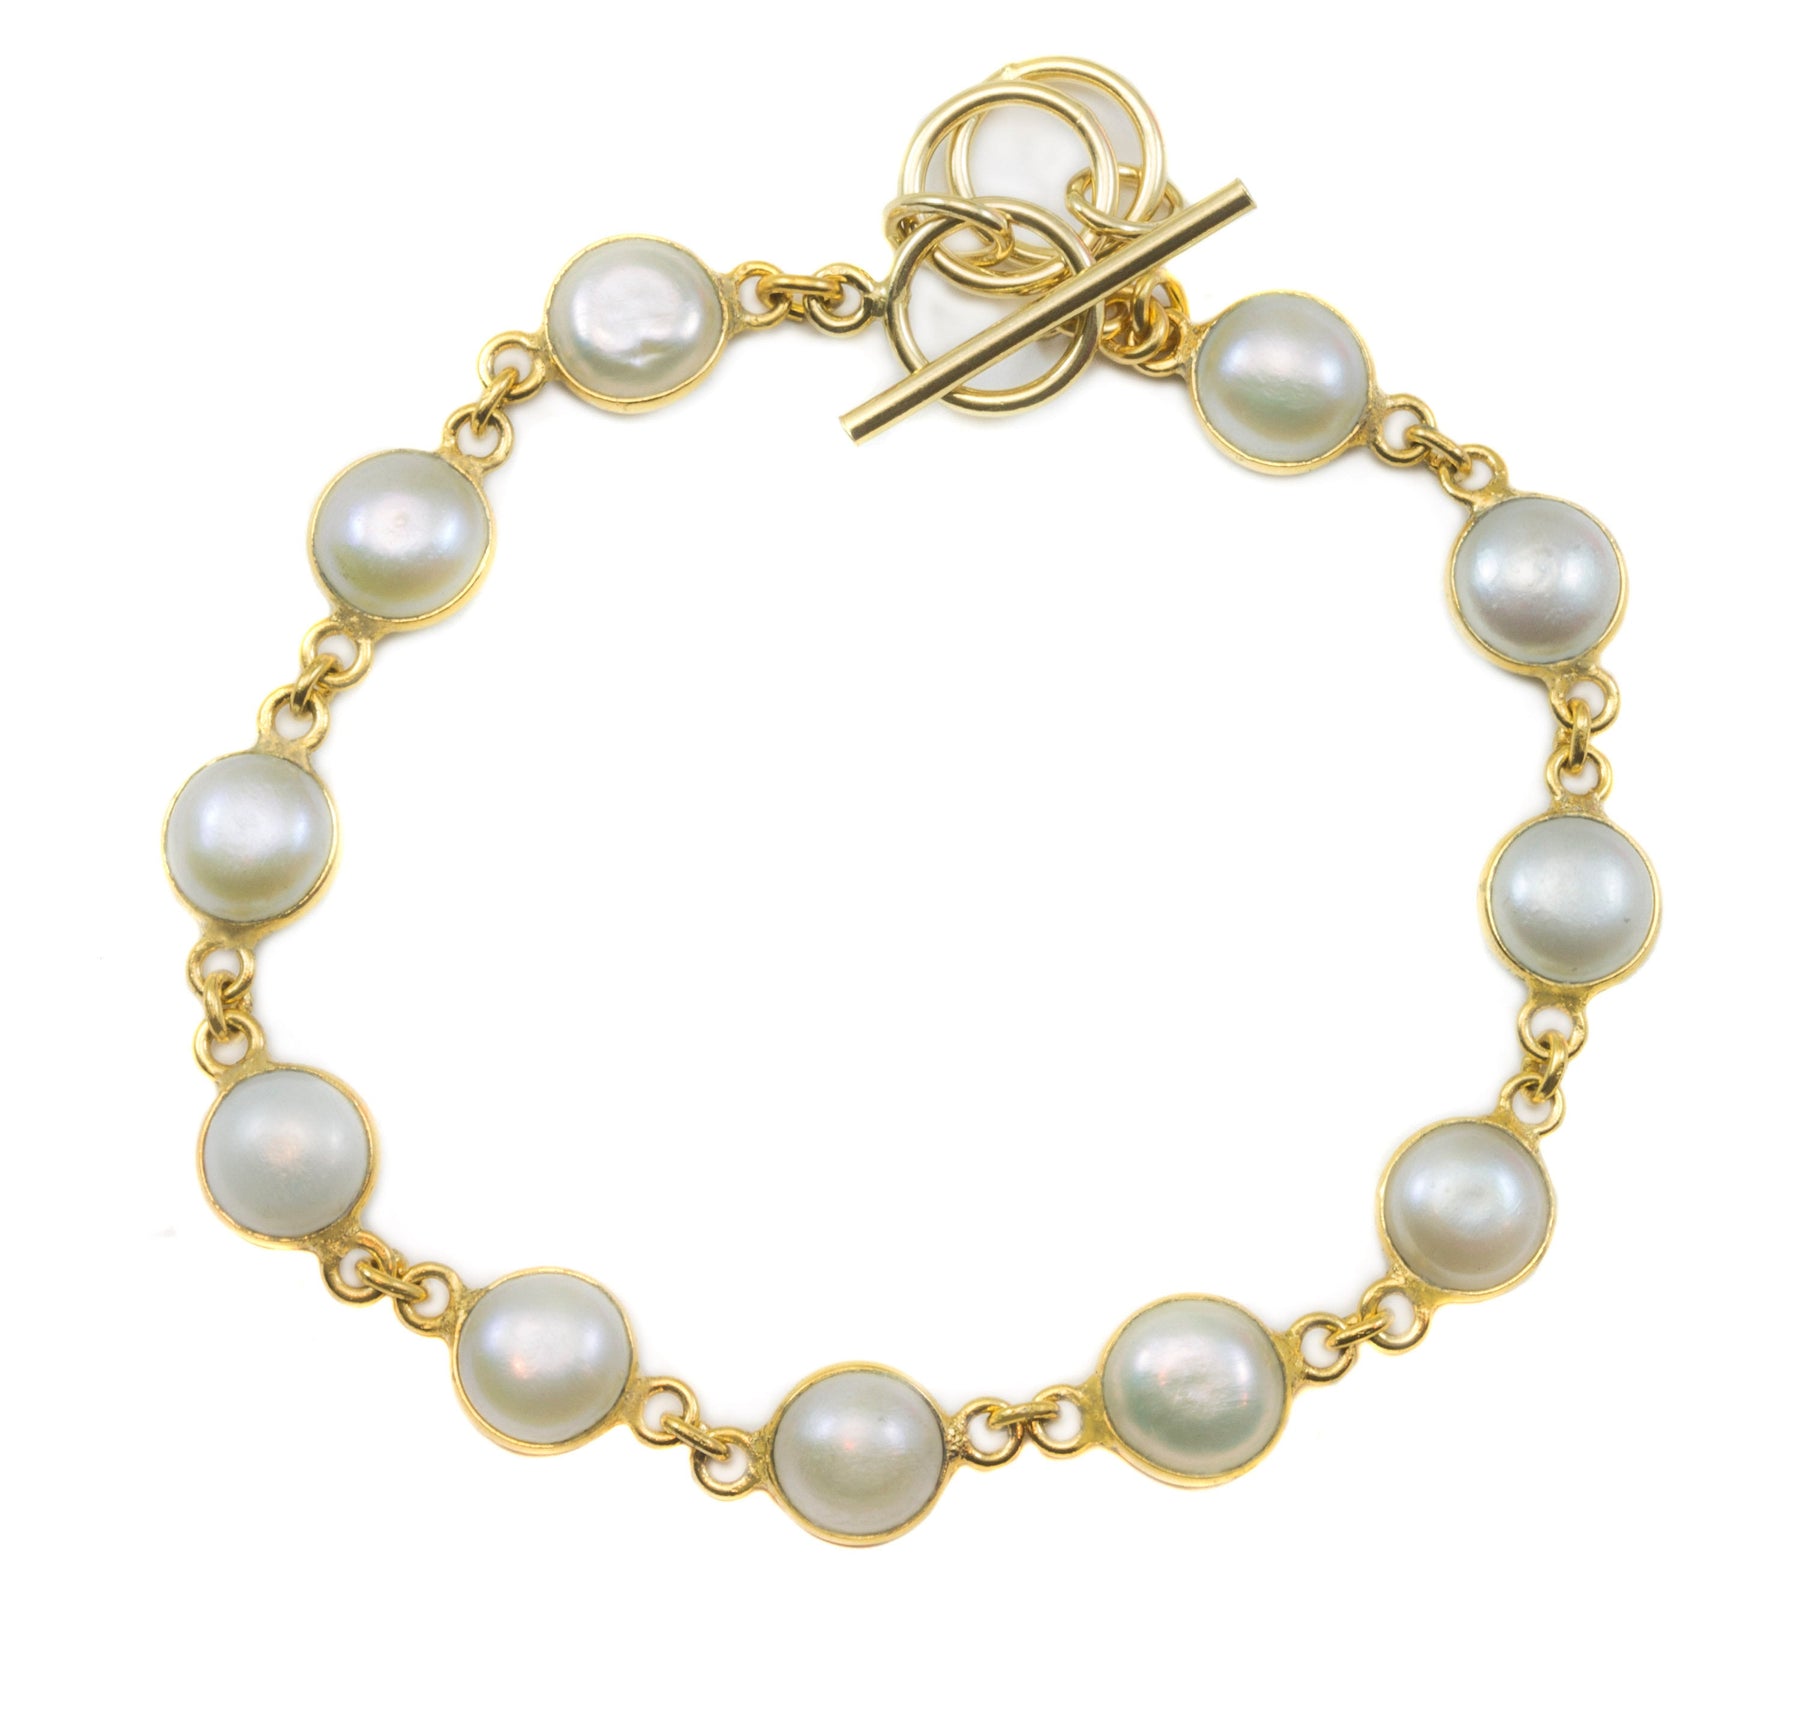 7.5 inch 8-9 mm Fresh Water Sterling Silver Wrap around Pearl Bracelet |  Christopher's Fine Jewelry